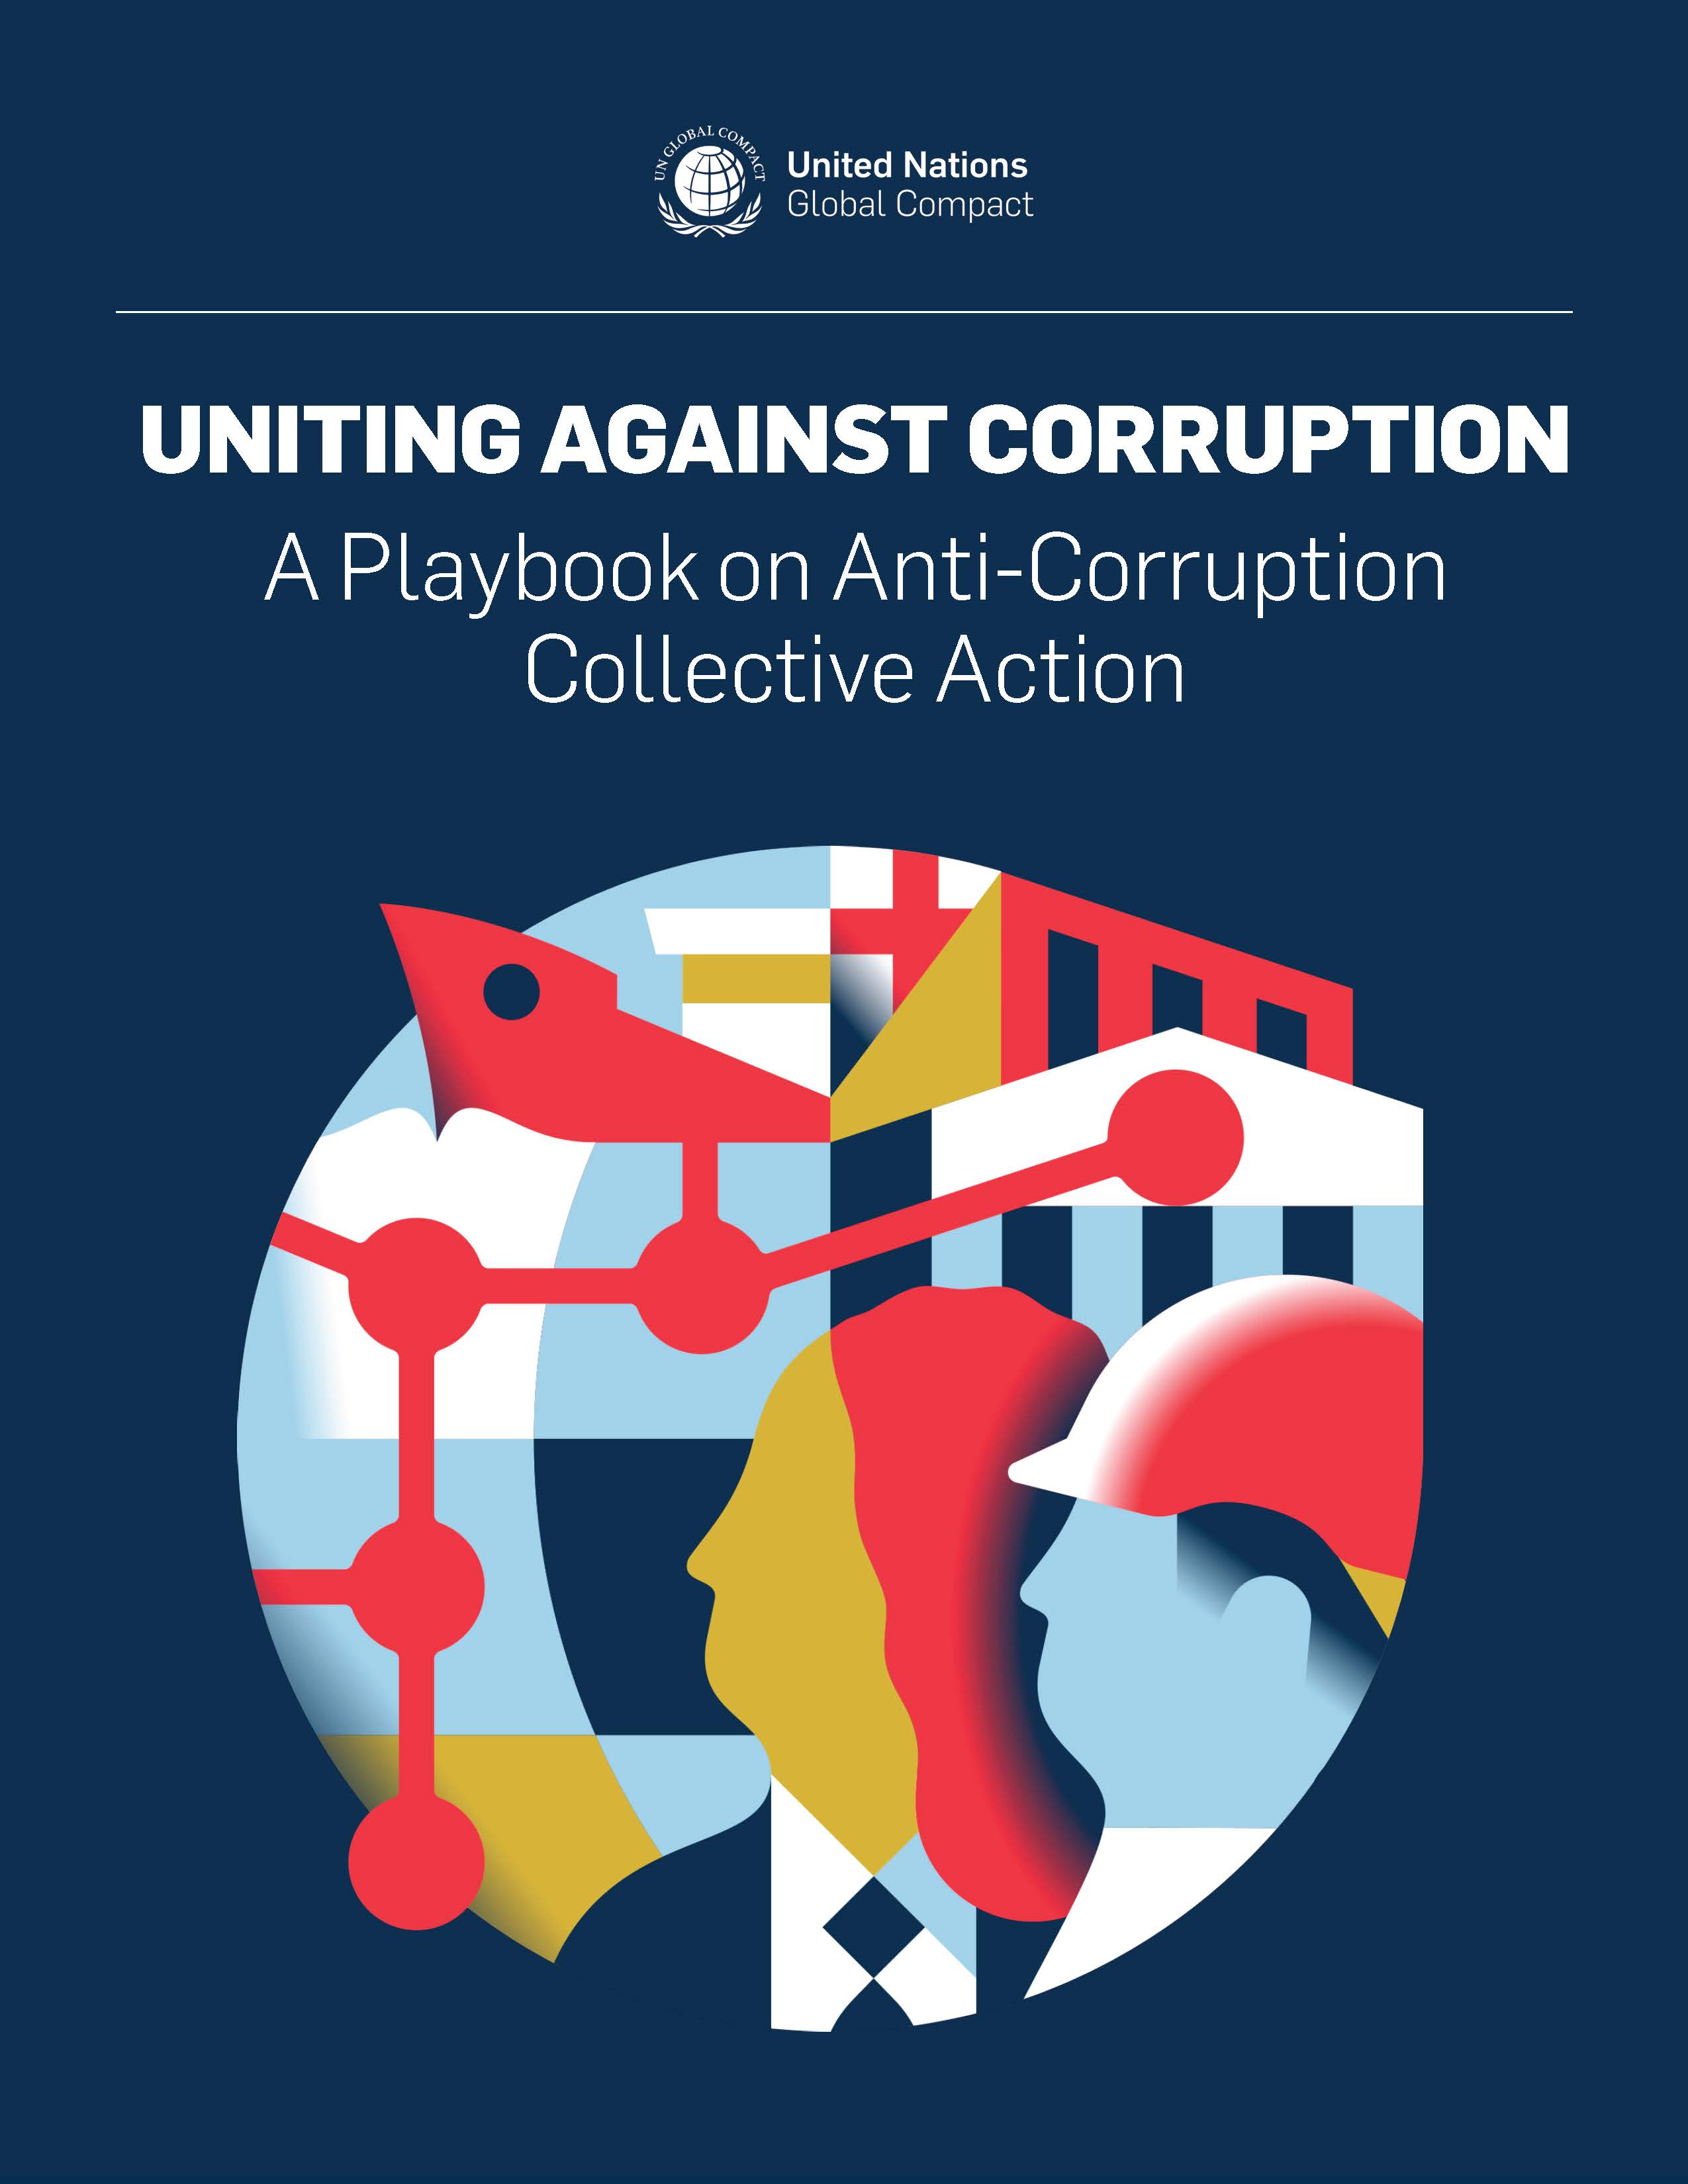 UNGC Playbook on Anti-Corruption Collective Action